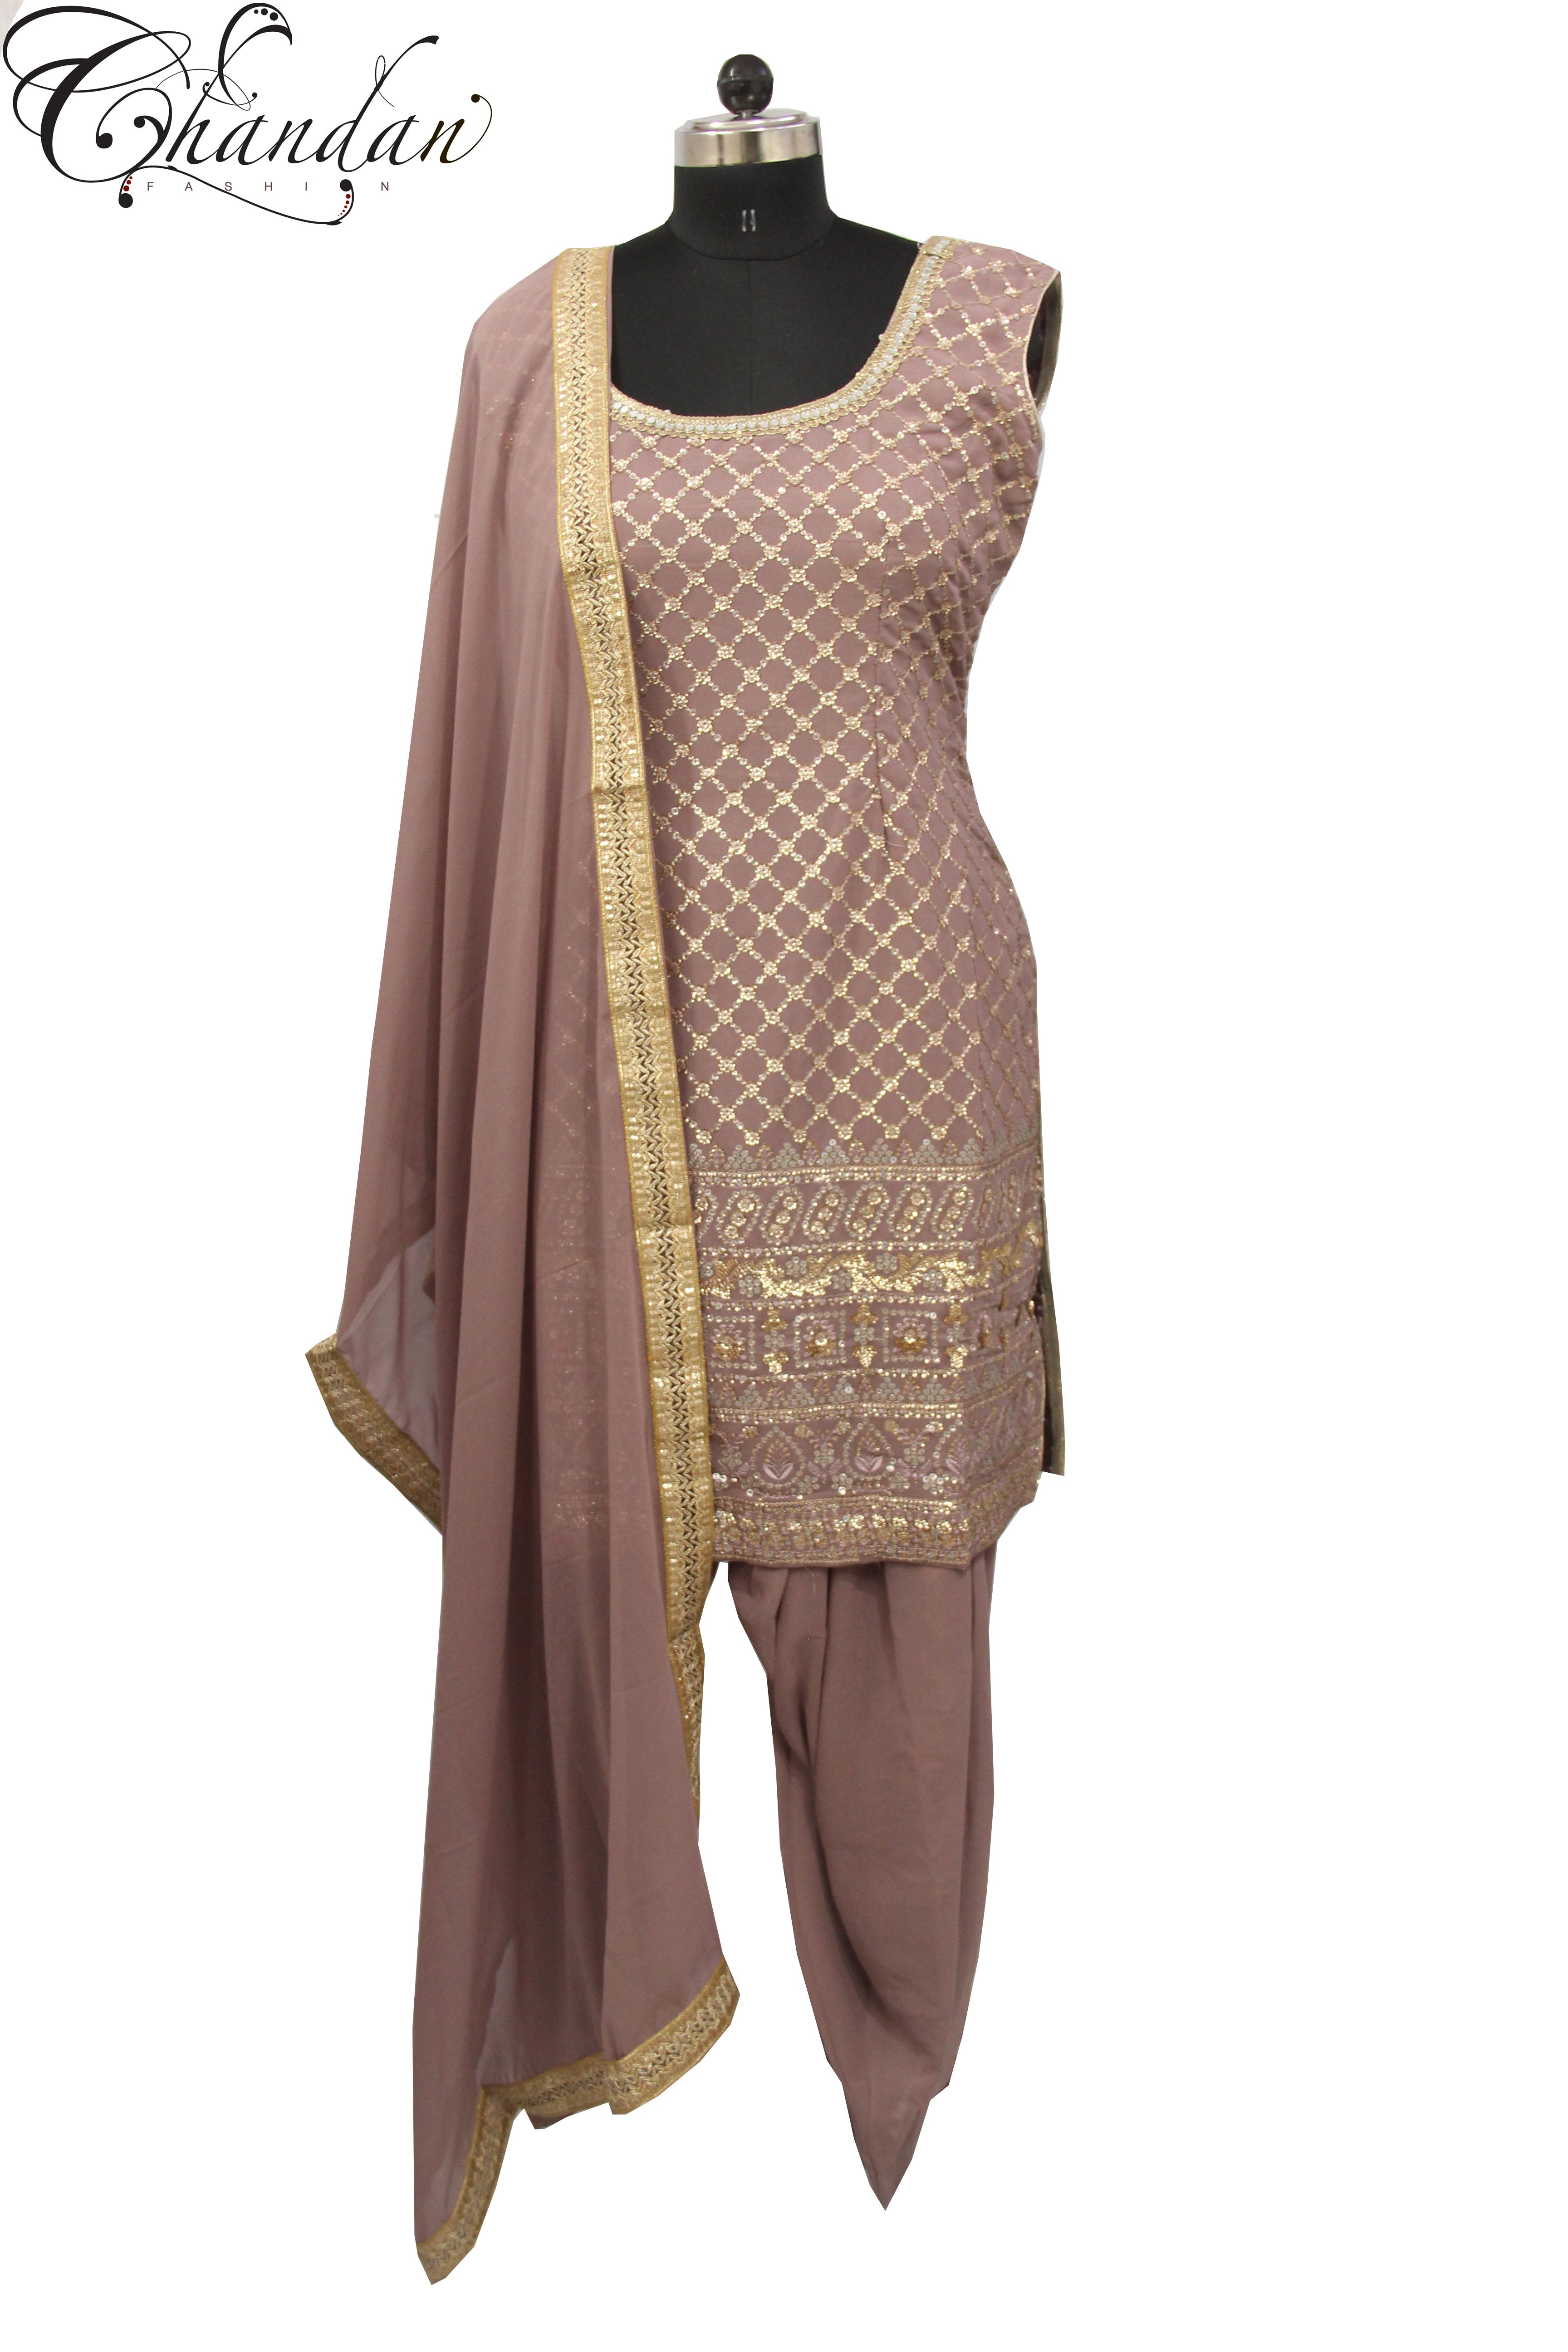 Mirror And Sequence Emb. Salwar Suit